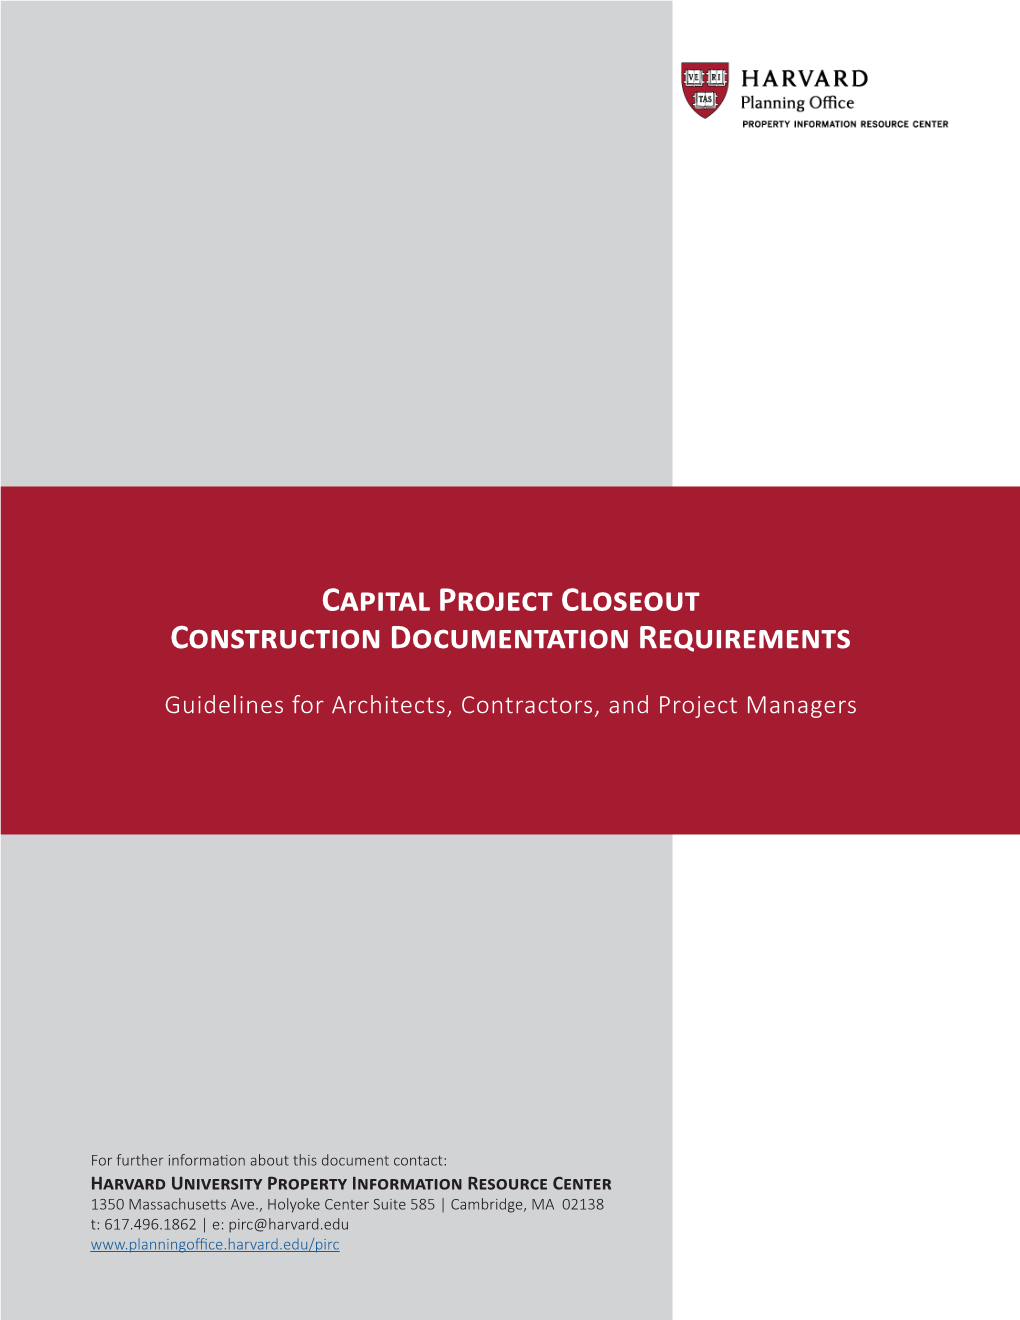 Capital Project Closeout Construction Documentation Requirements